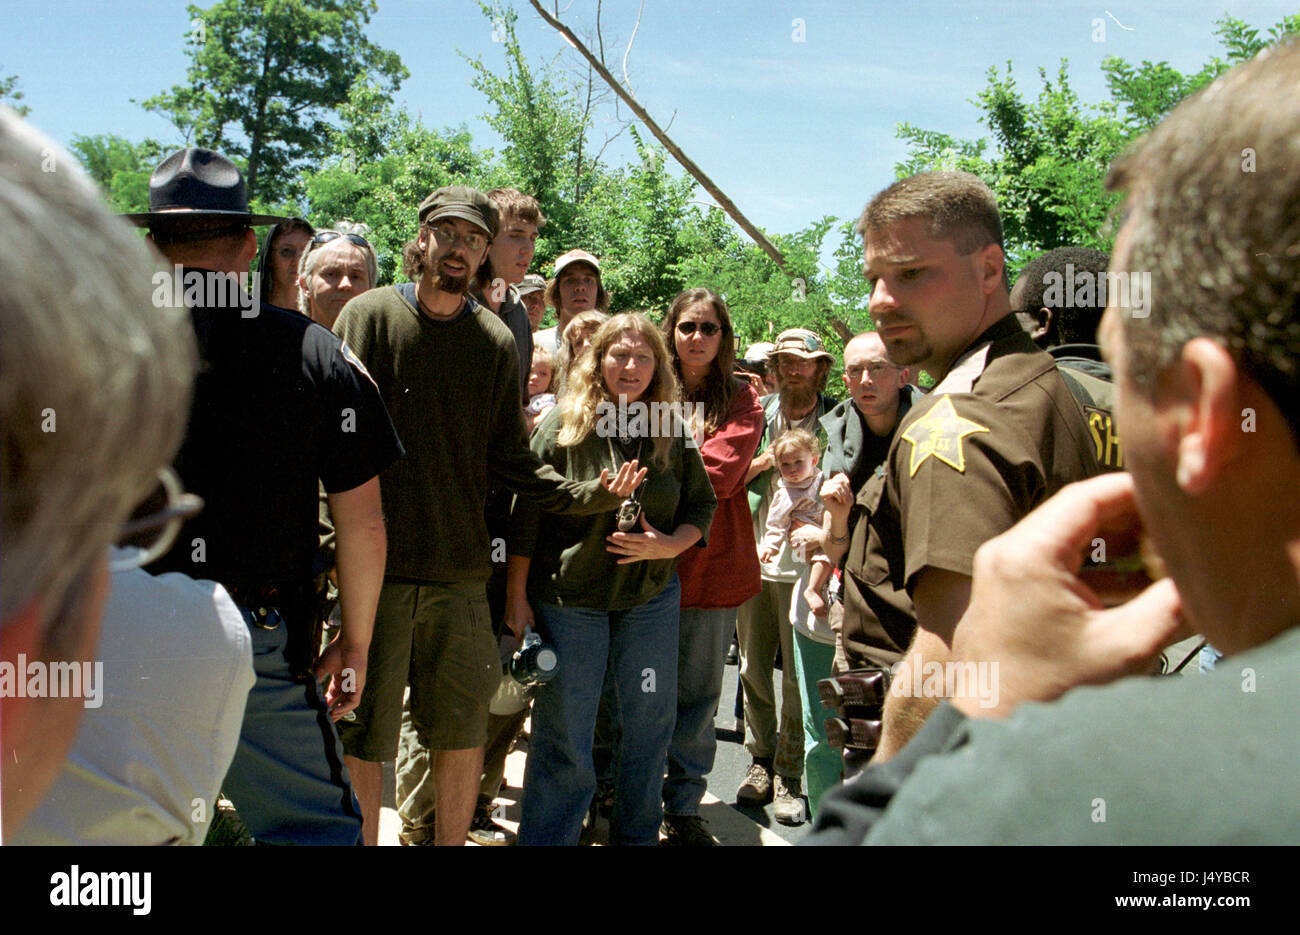 Tensions rise at  police line as treesitters are arrested July 6, 2001 in Bloomington, Indiana. To stop a low income housing division from being built on land filled with trees and sinkhole a tree sit began during March 2001 and lasted more than 100 days in Bloomington, Indiana. The first sitter Tracy 'Dolphin' McNeely secretly climbed down in in late June citing burnout after she was supported by a ground crew for months. Another sitter, Mike 'Moss' Englert, who had replaced her managed to avoid being arrested when waw enforcement authorities raided the Bluebird treesit site on July 6, 2001.  Stock Photo